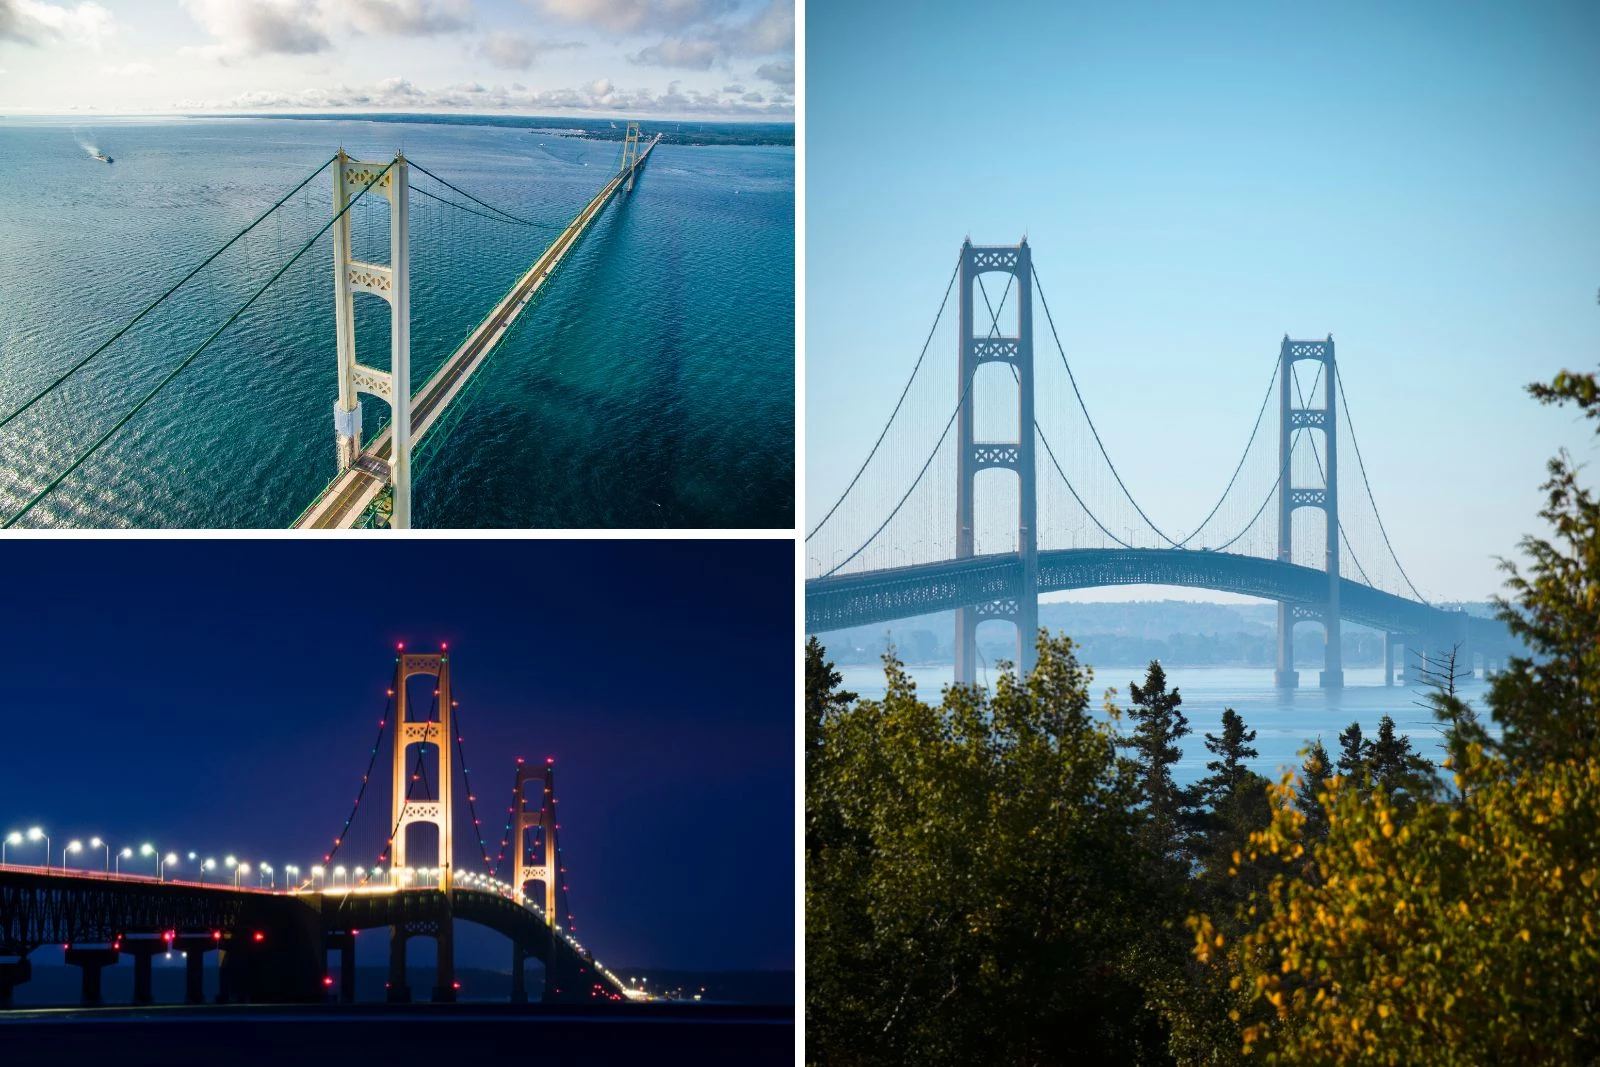 Own a Piece of Michigan History – Vintage Parts of Mackinac Bridge Up for Auction